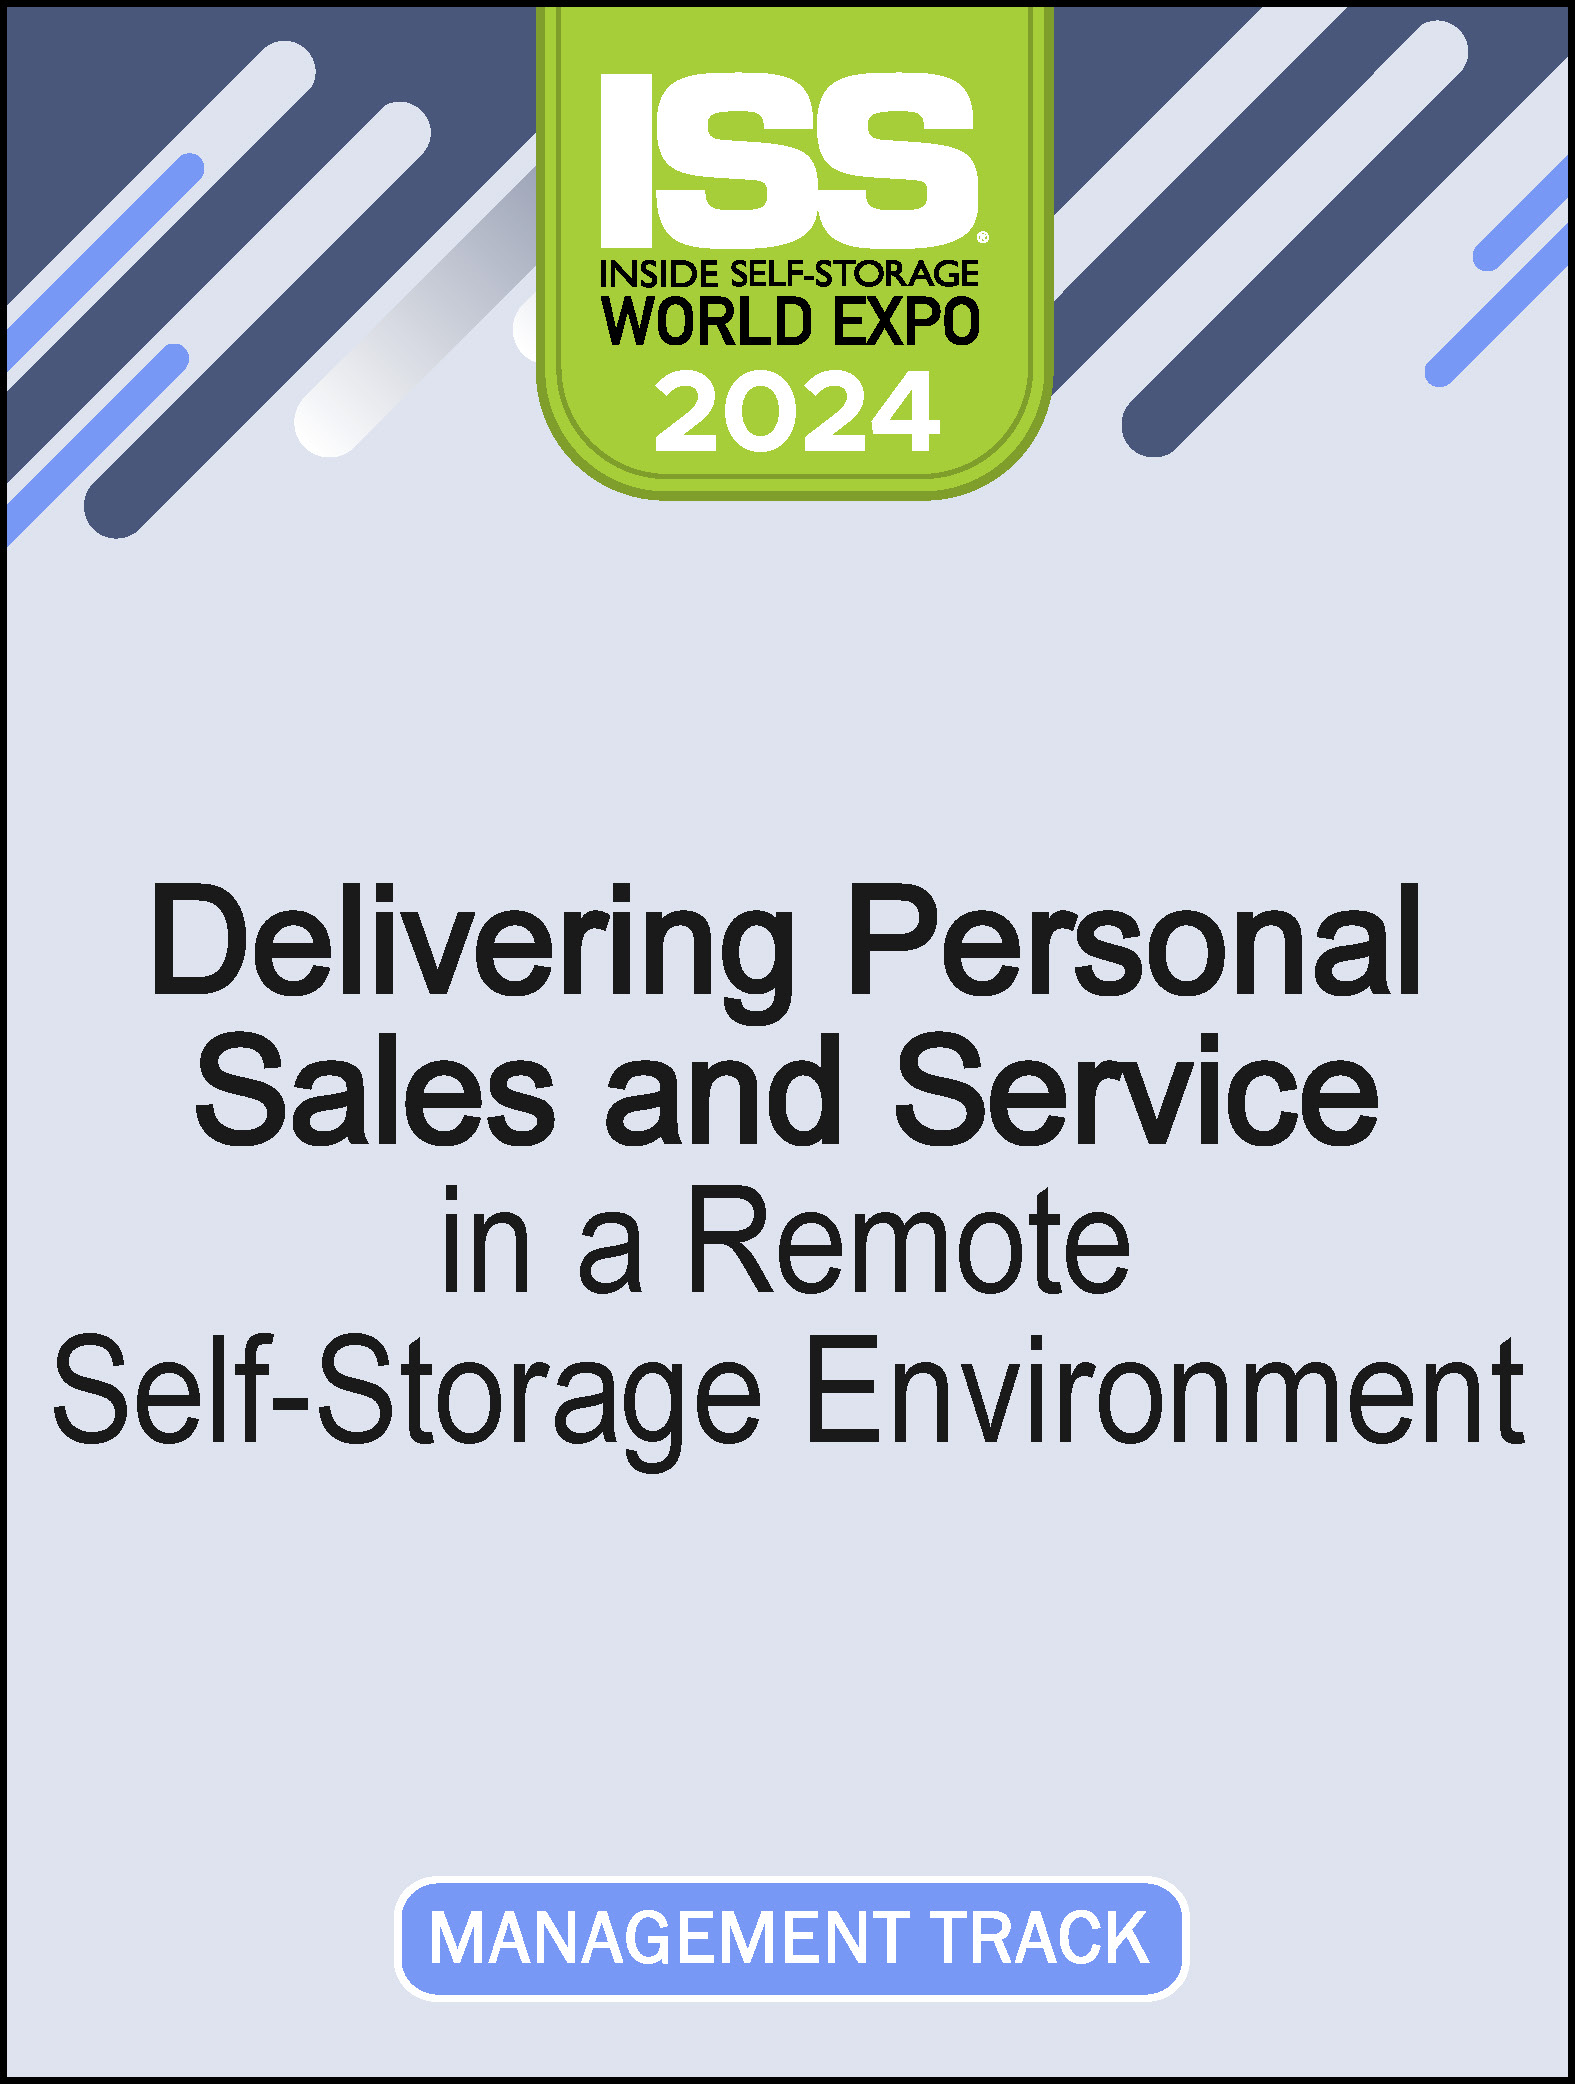 Video Pre-Order - Delivering Personal Sales and Service in a Remote Self-Storage Environment